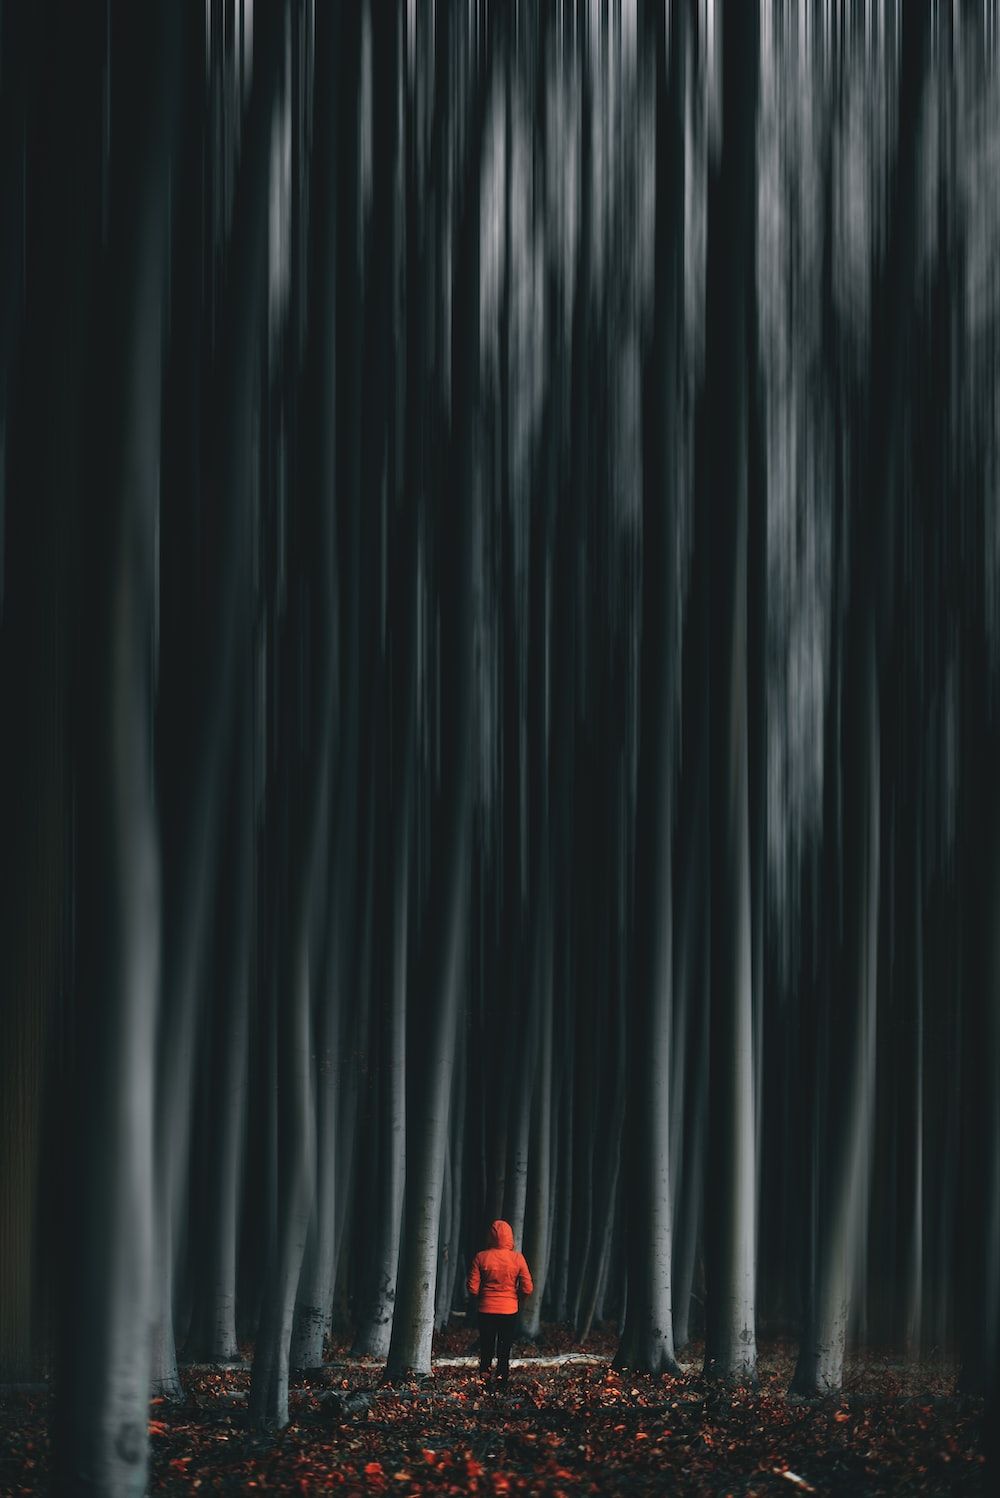 A person in red standing alone among trees - Horror